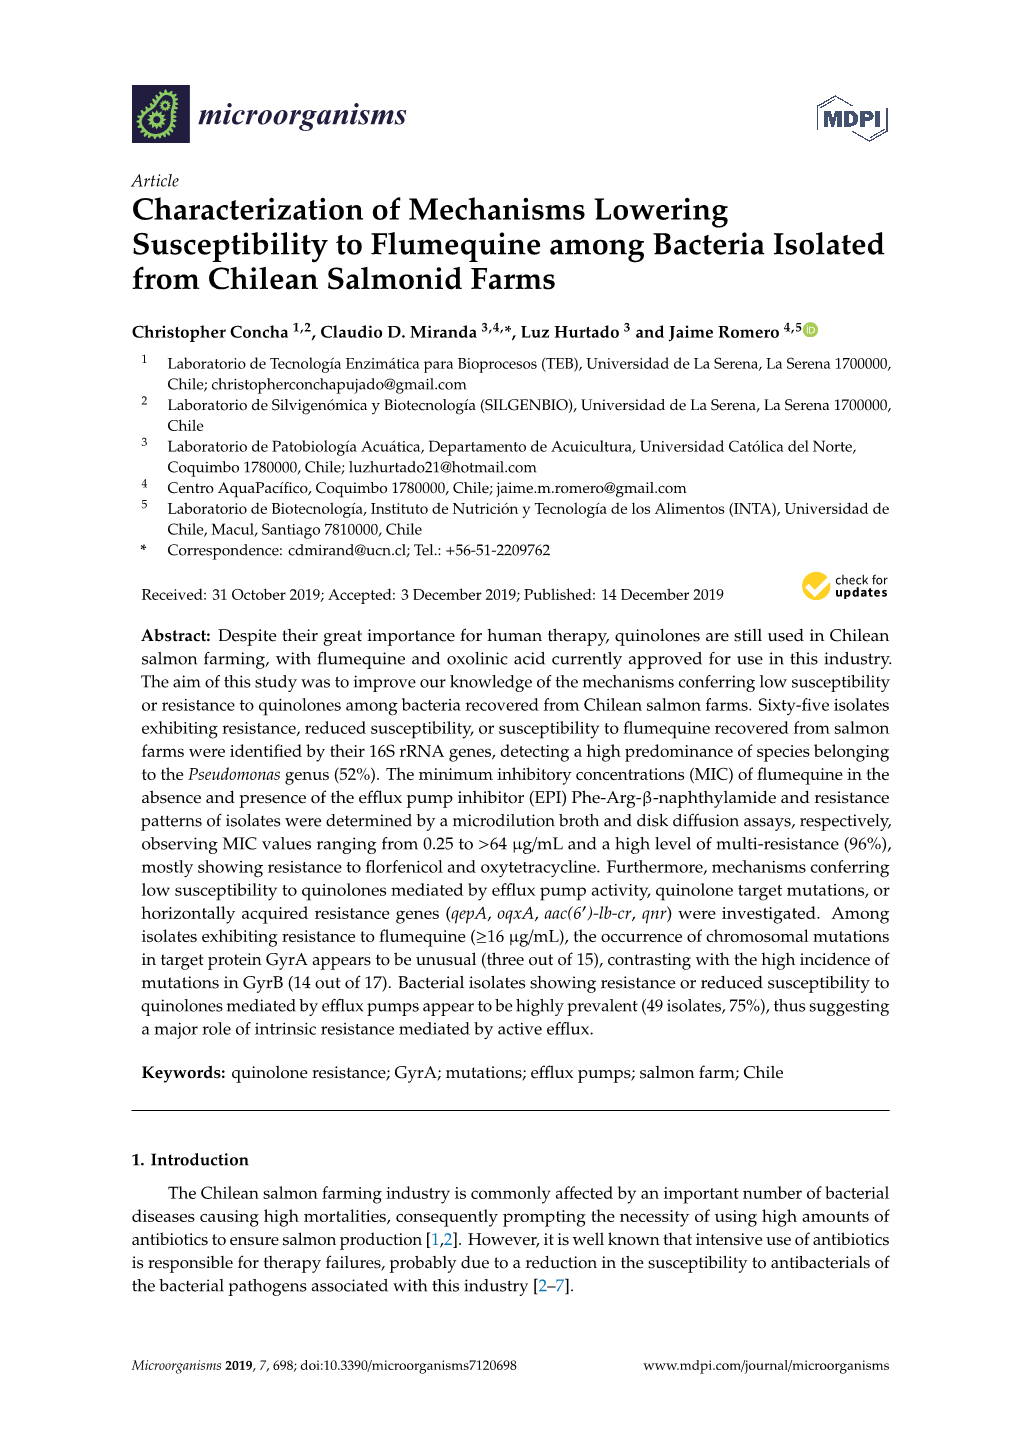 Characterization of Mechanisms Lowering Susceptibility to Flumequine Among Bacteria Isolated from Chilean Salmonid Farms